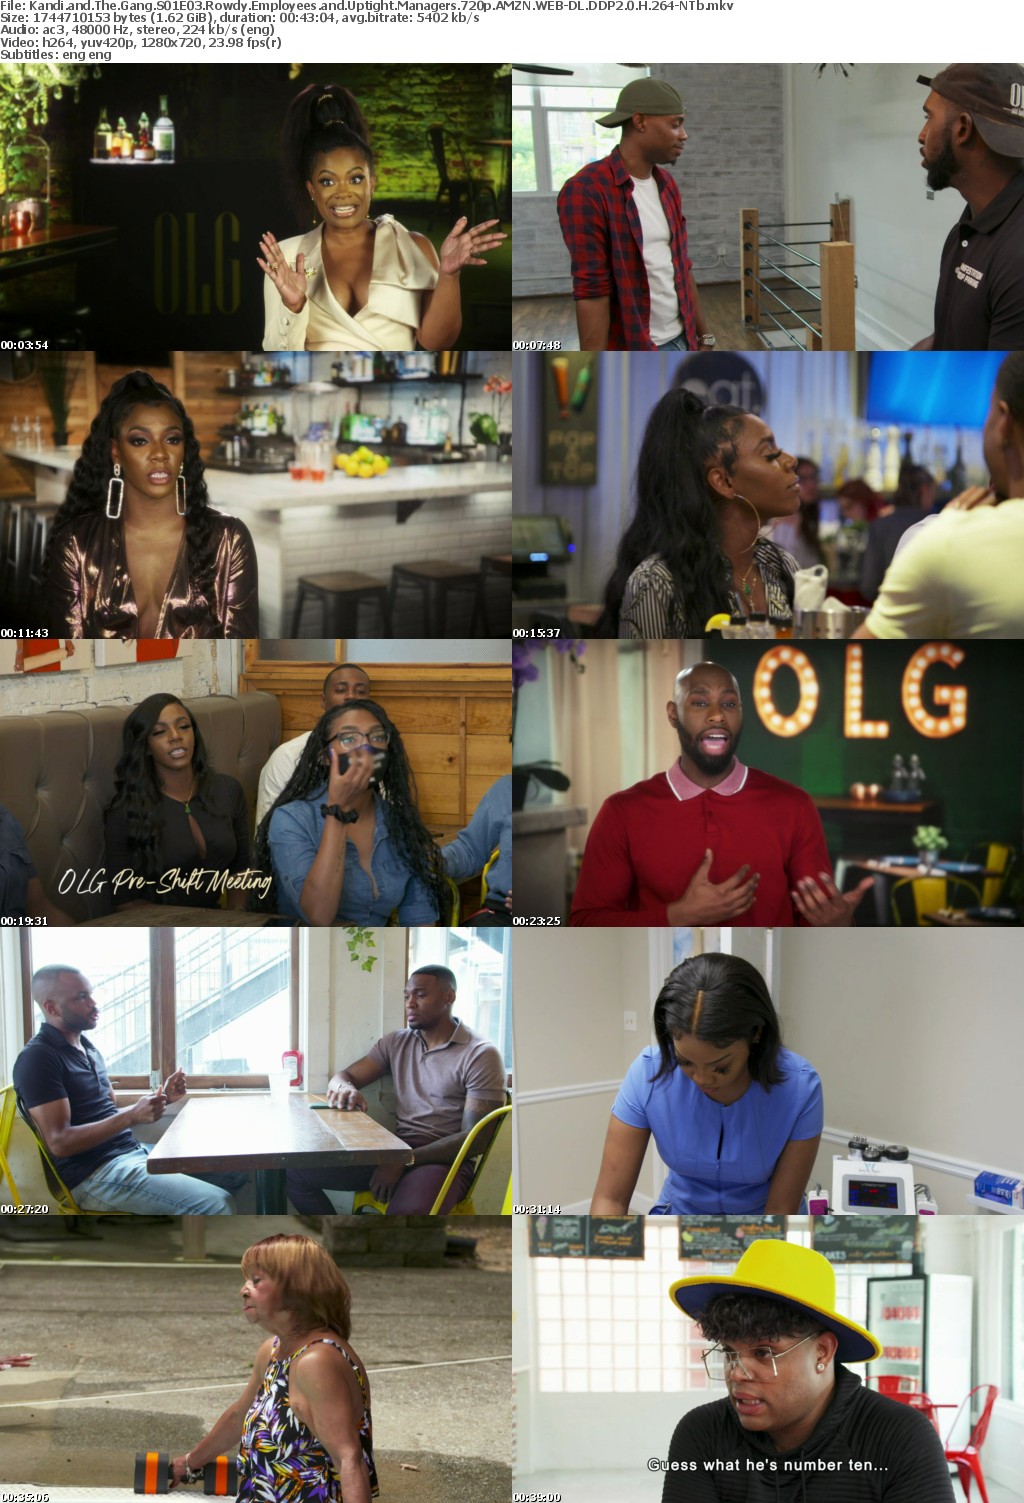 Kandi and The Gang S01E03 Rowdy Employees and Uptight Managers 720p AMZN WEBRip DDP2 0 x264-NTb